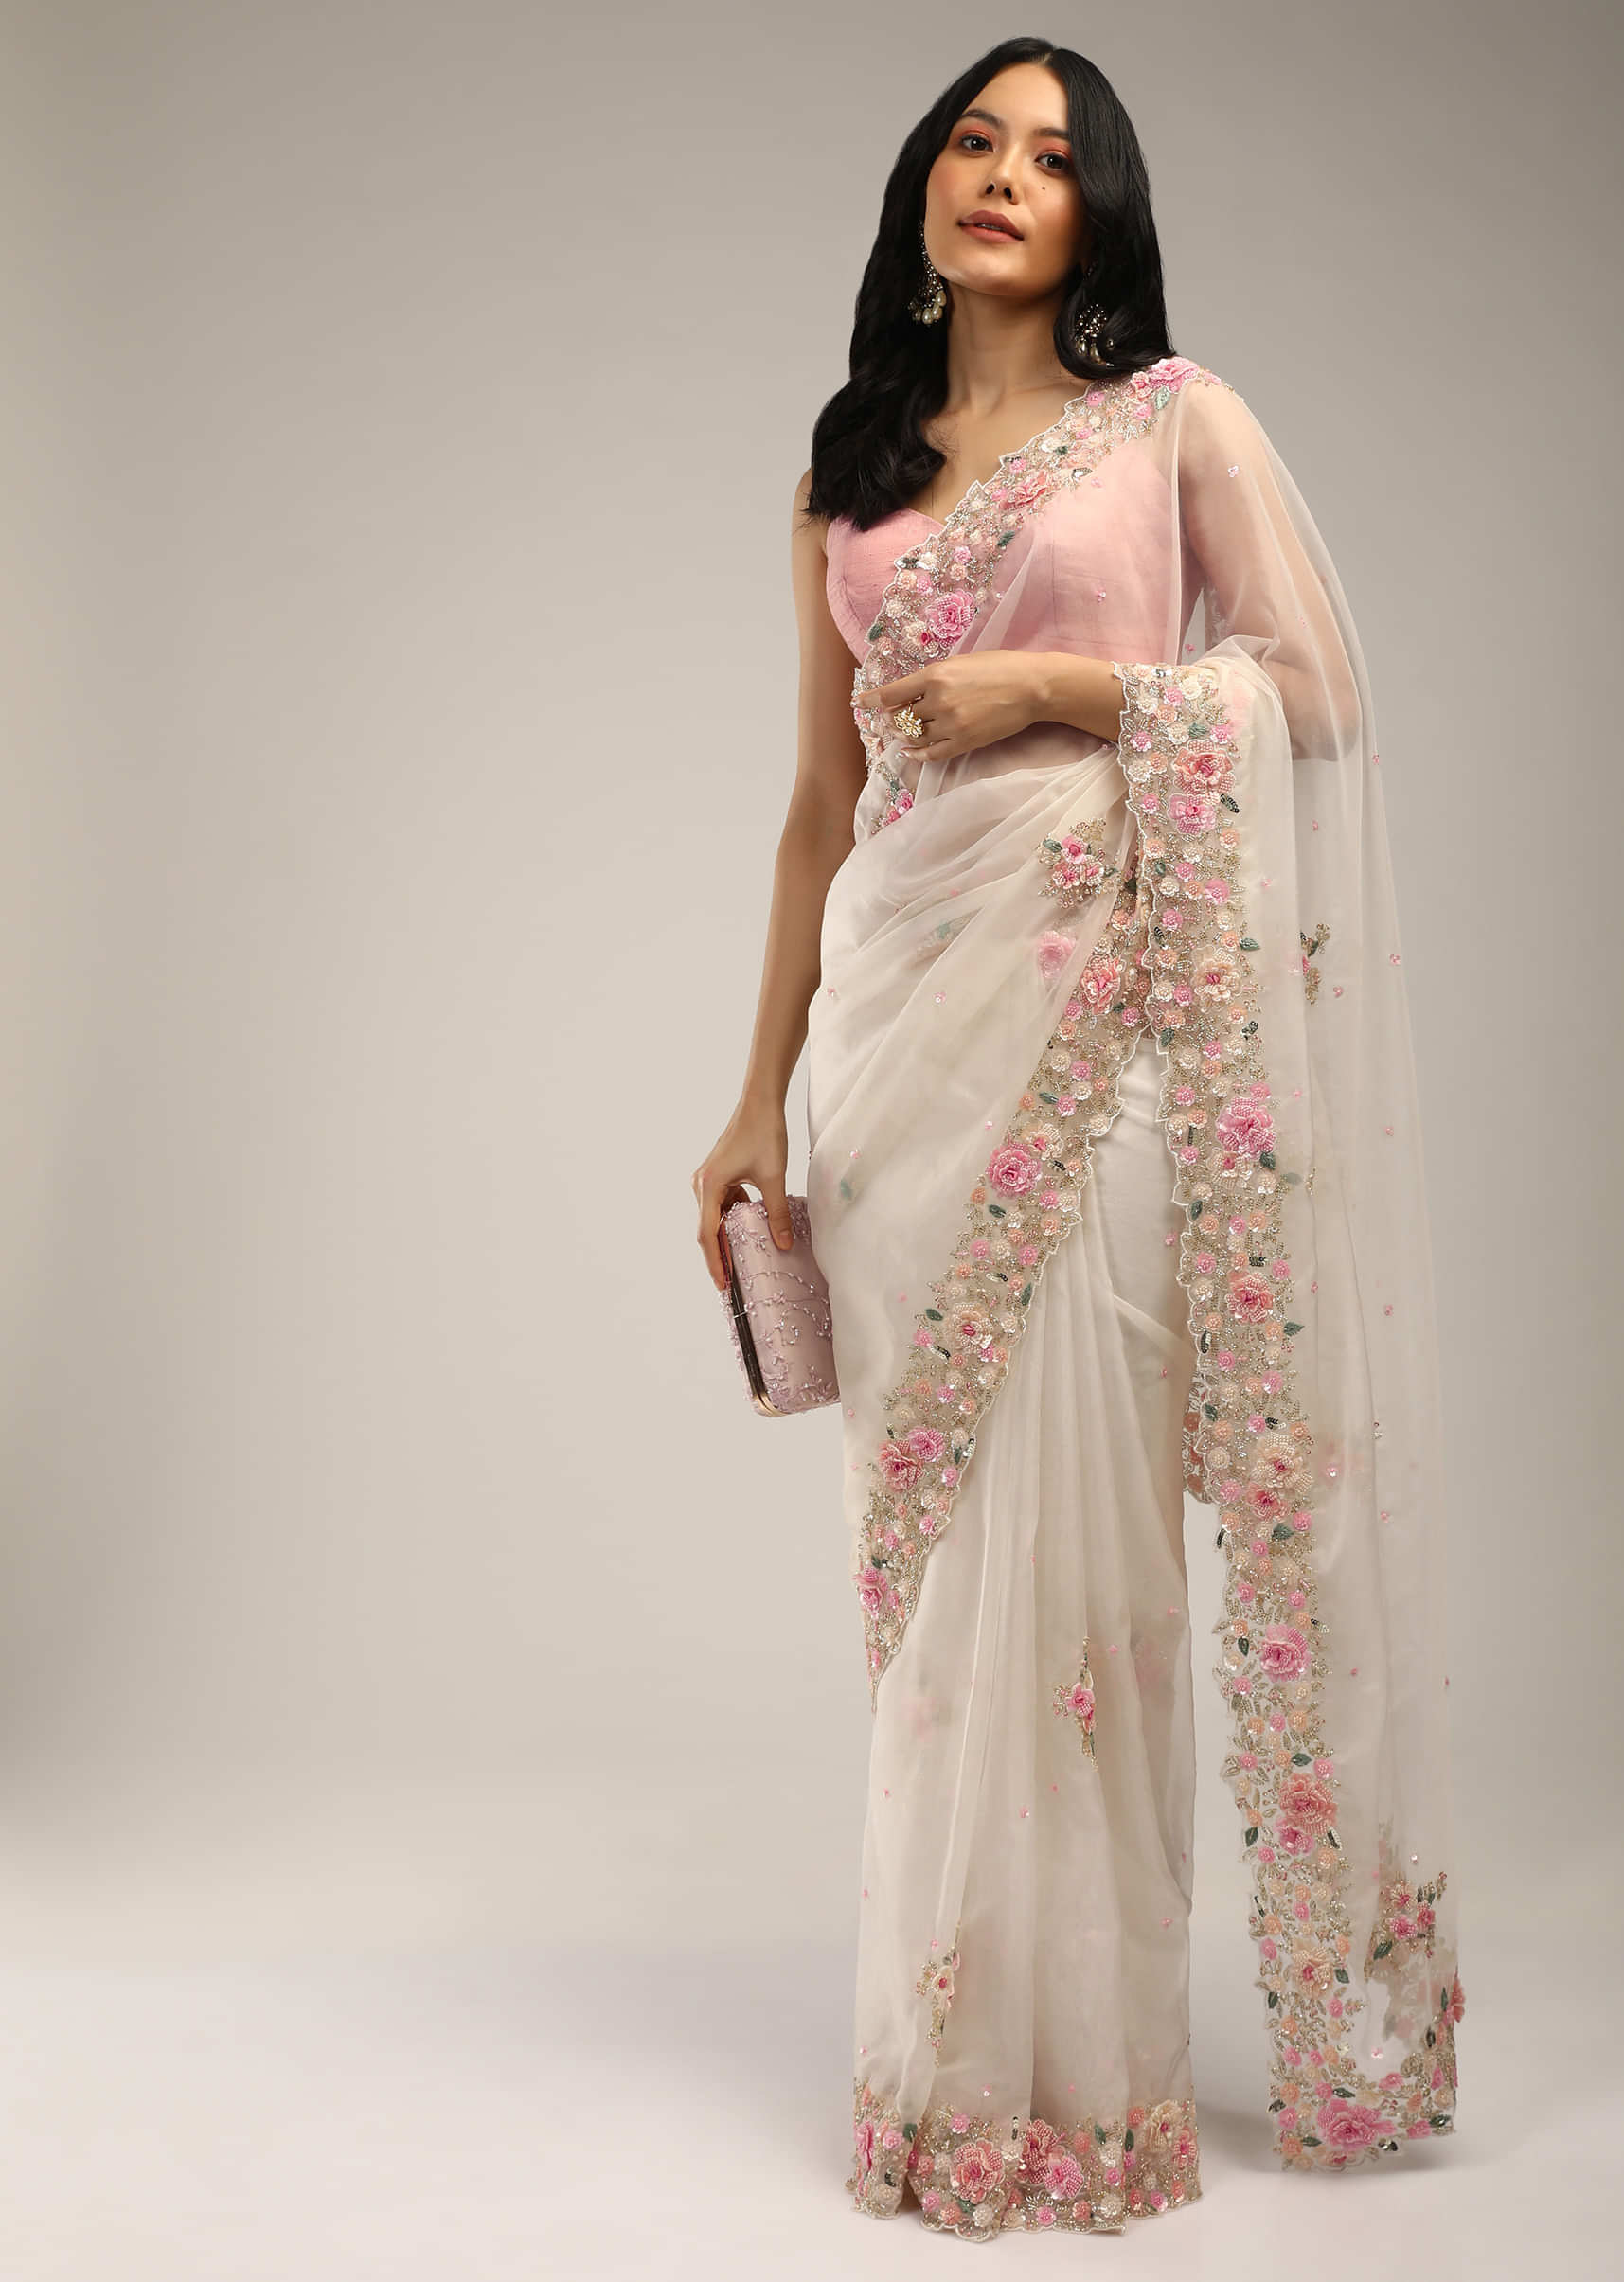 Powder White Saree In Organza With 3D Flower Embroidered Border And Buttis Featuring Multi Colored Moti And Sequins  